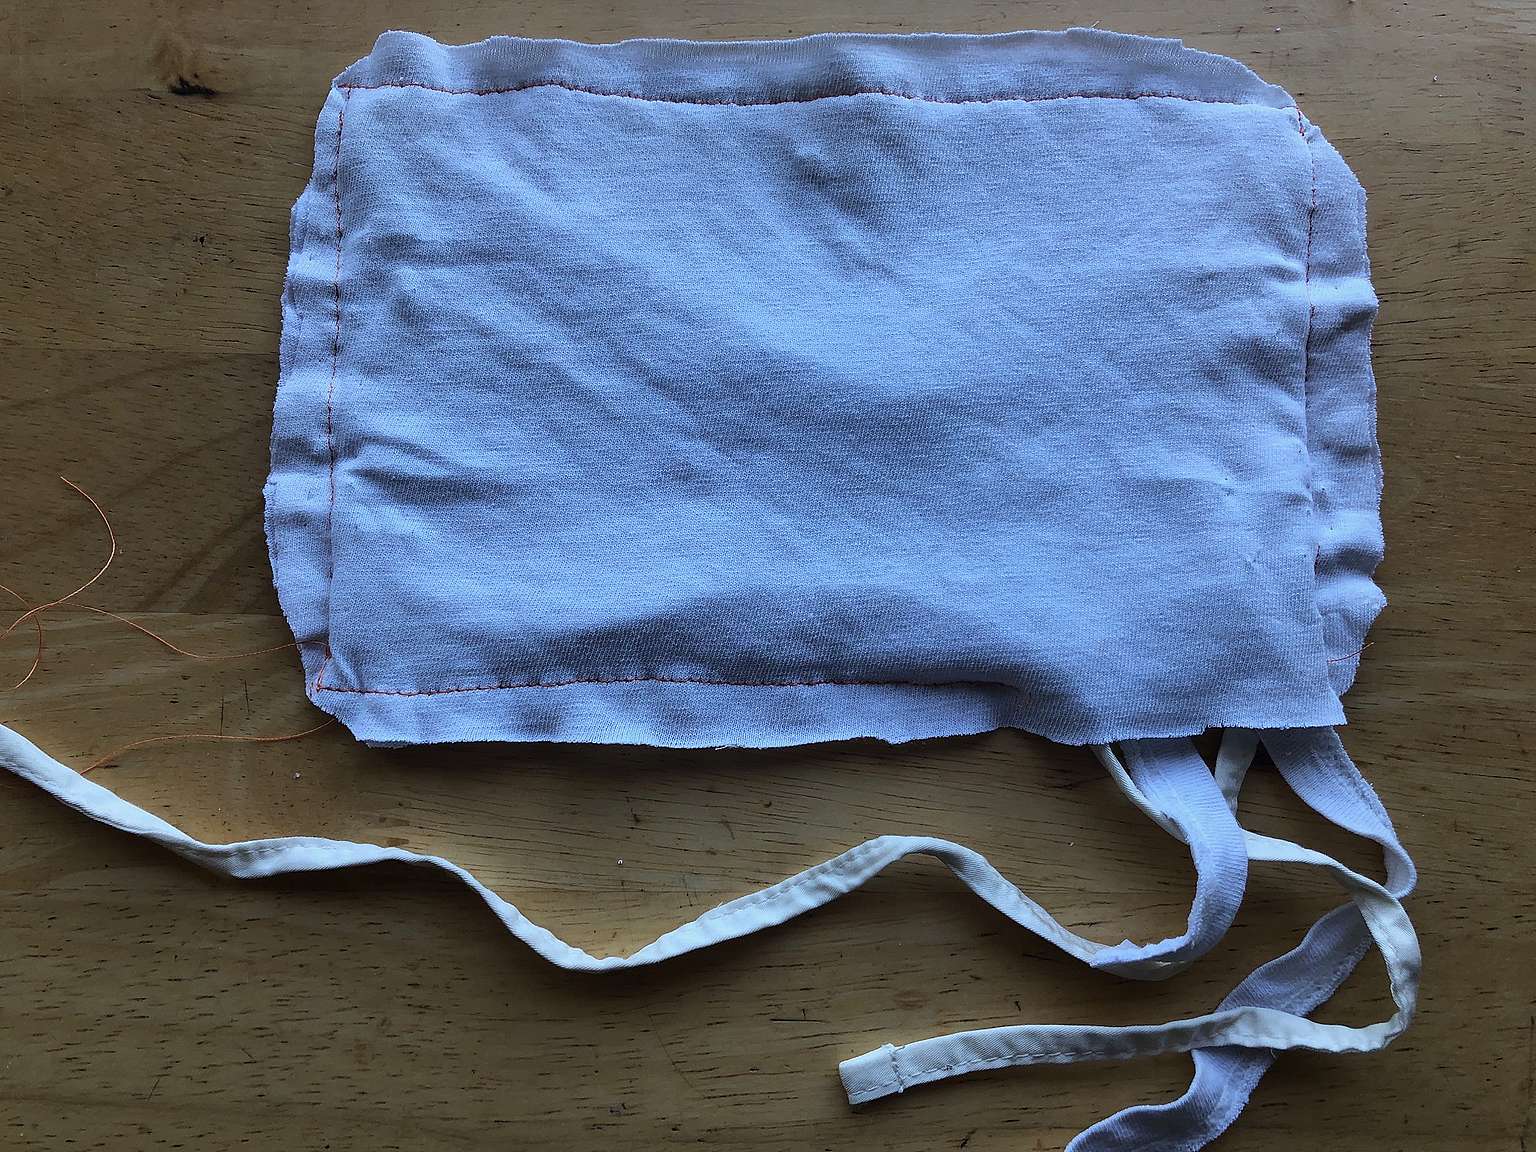 How to make an upcycled fabric face mask - Greenpeace Canada